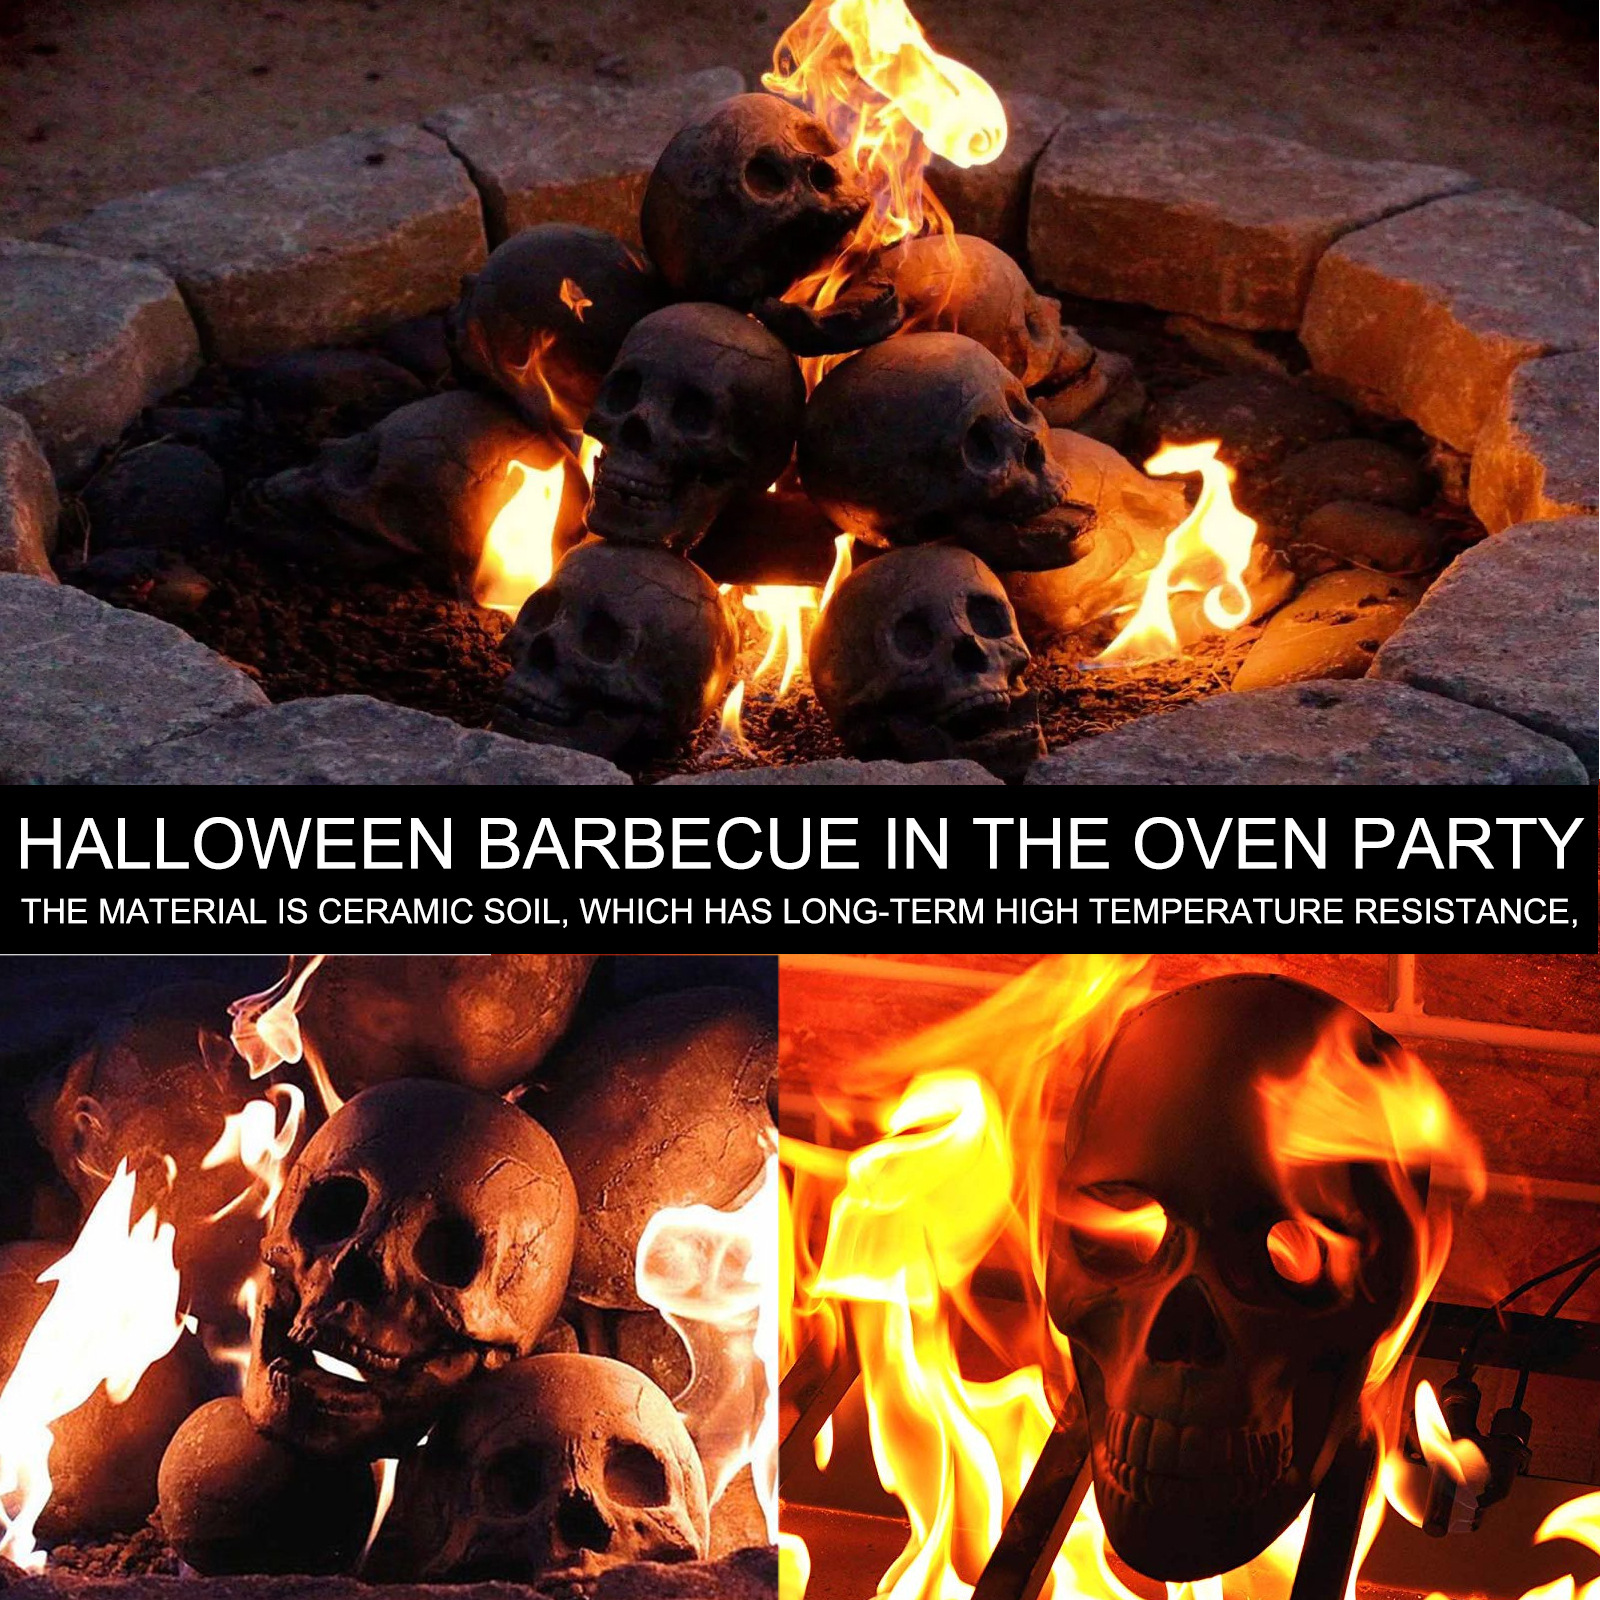 Simulation Skull Halloween Frightening Decoration Home Decor Wood Fire Pit Fireplace Burning Horror Atmosphere Props Decoration